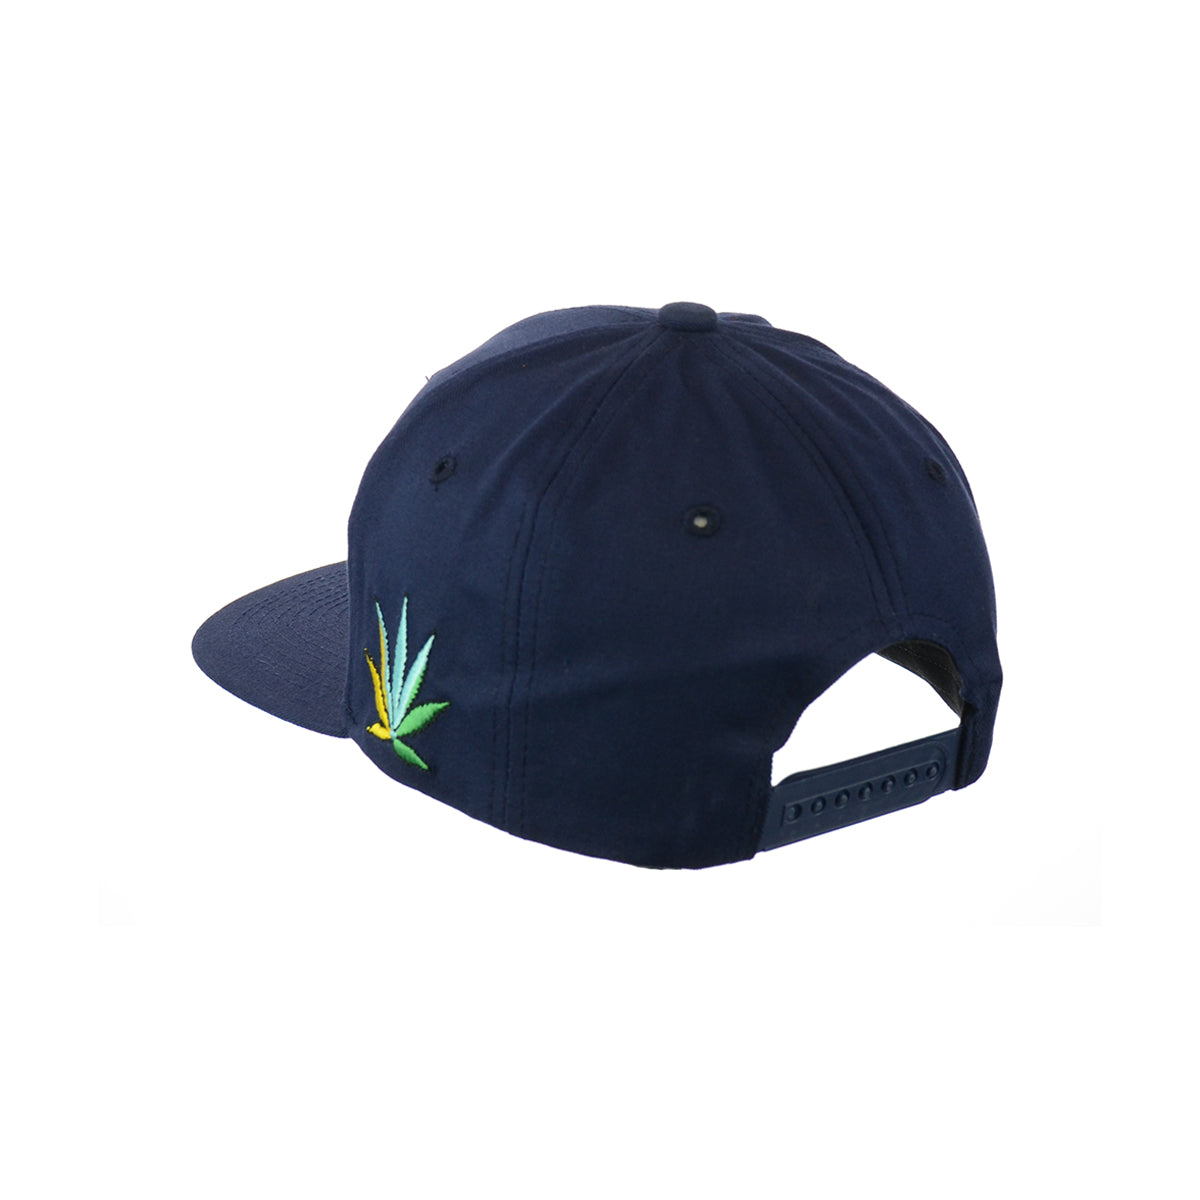 Hight Life Hat Embroidered Snapback